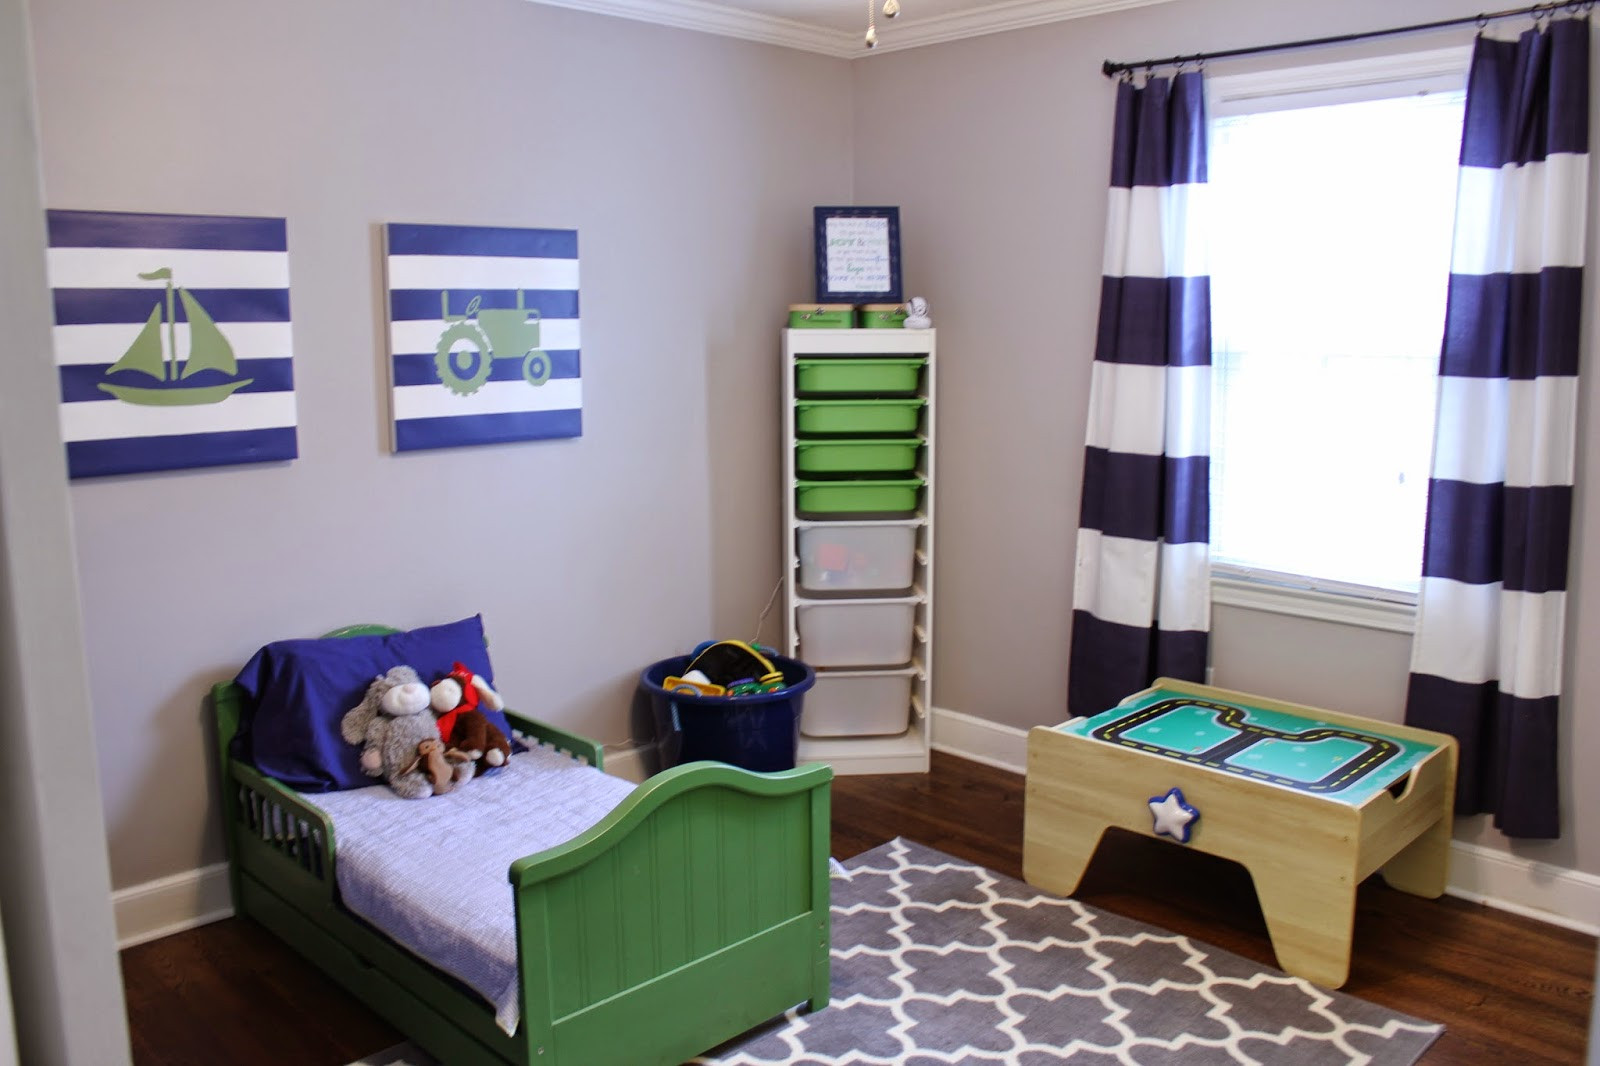 Toddler Boy Bedroom Themes
 Toddler Room Ideas for Boy – Finding the perfect Room